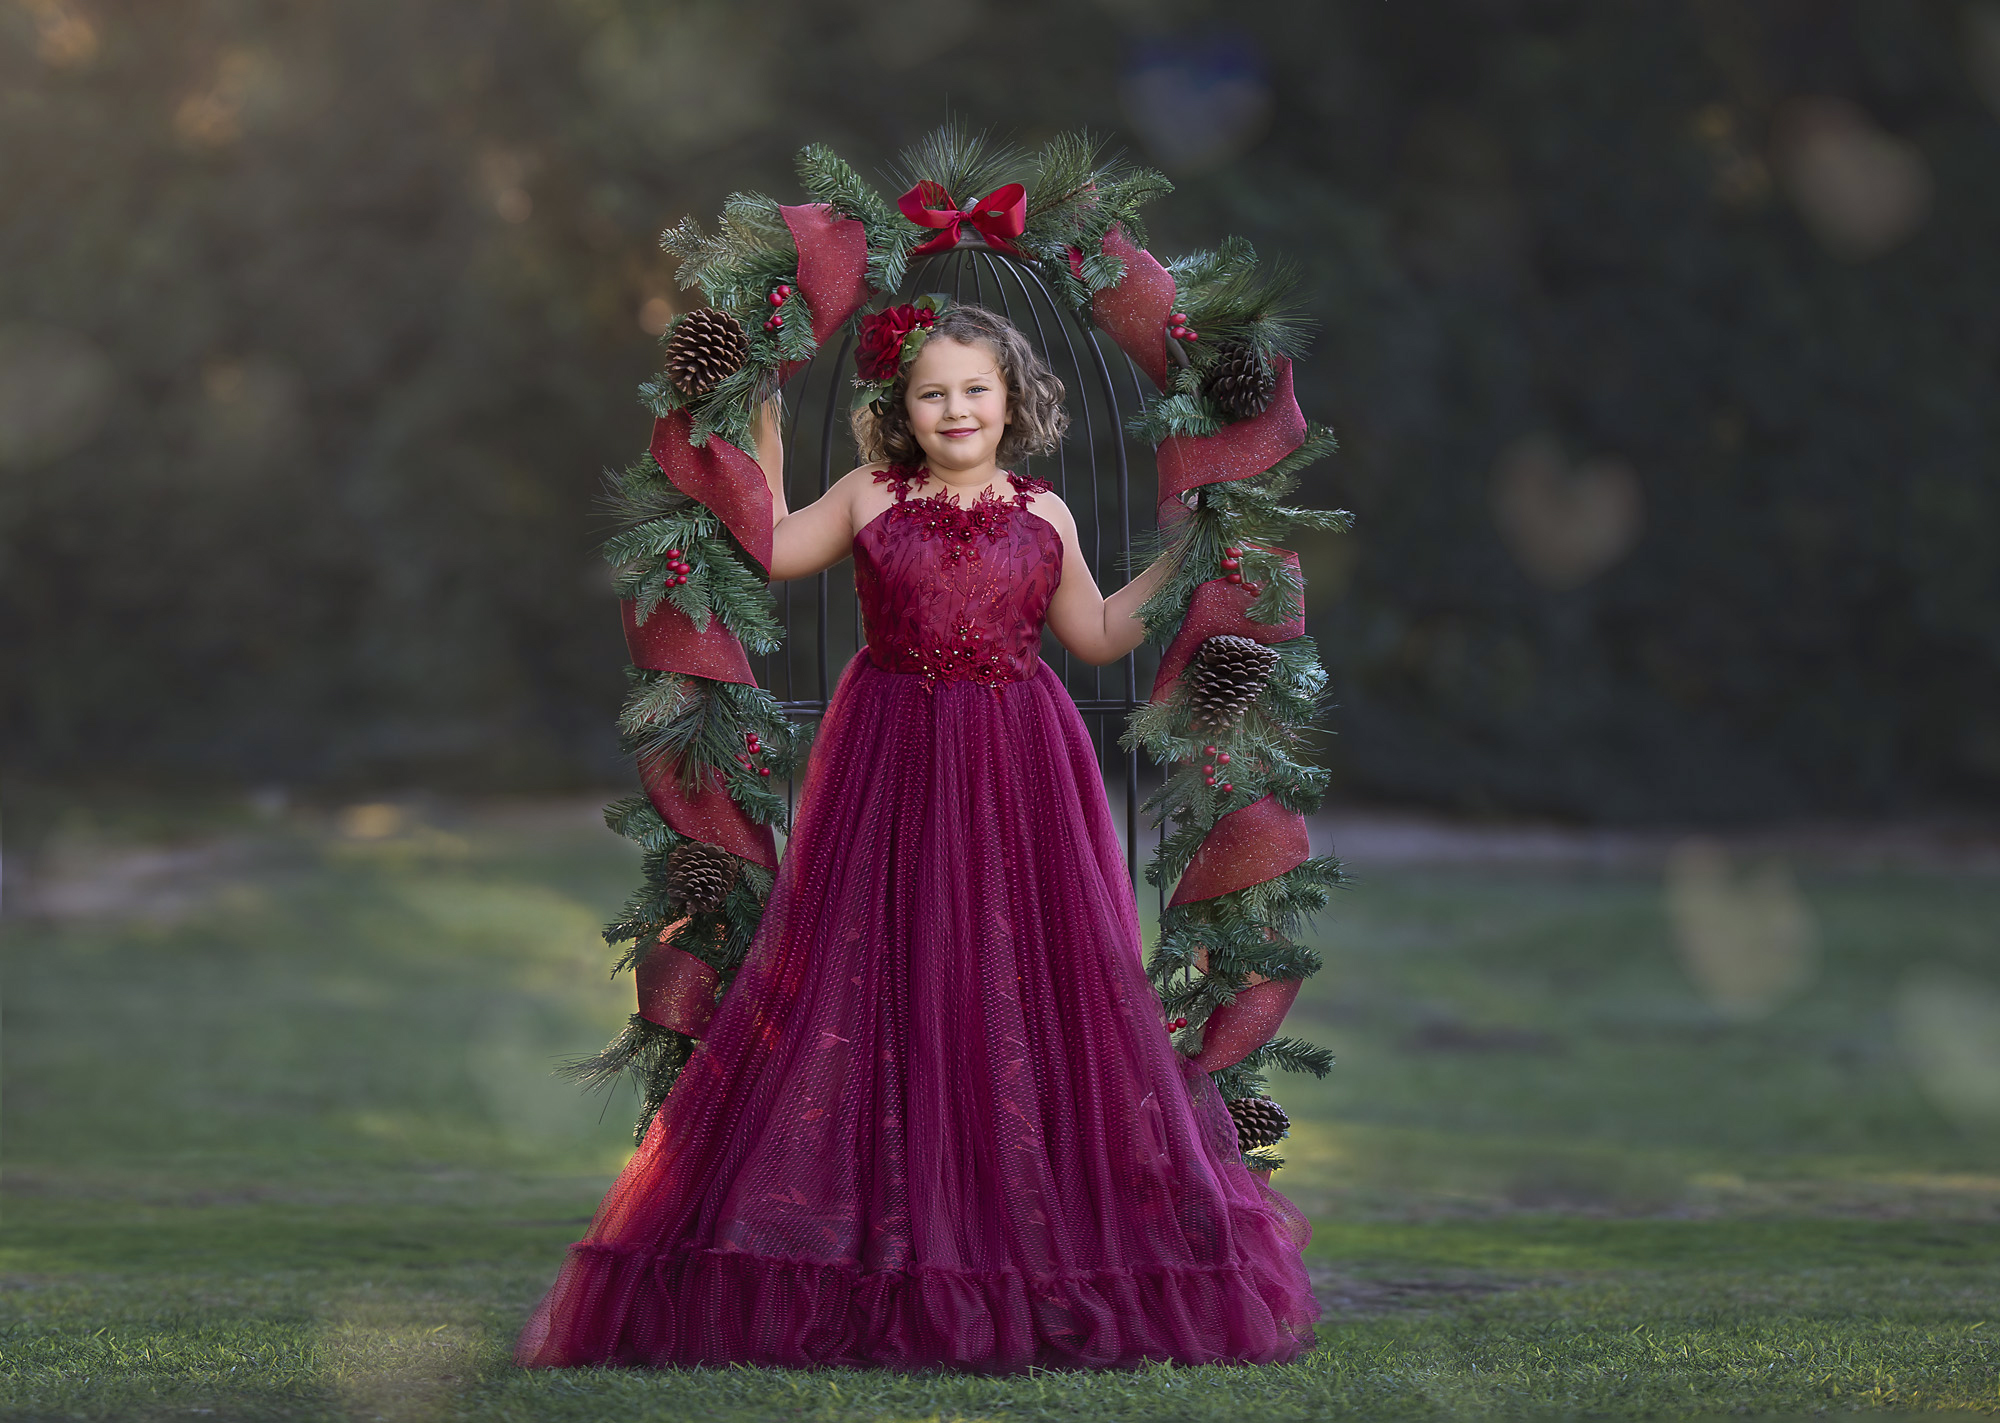 Girl standing in holiday garland chair on grass